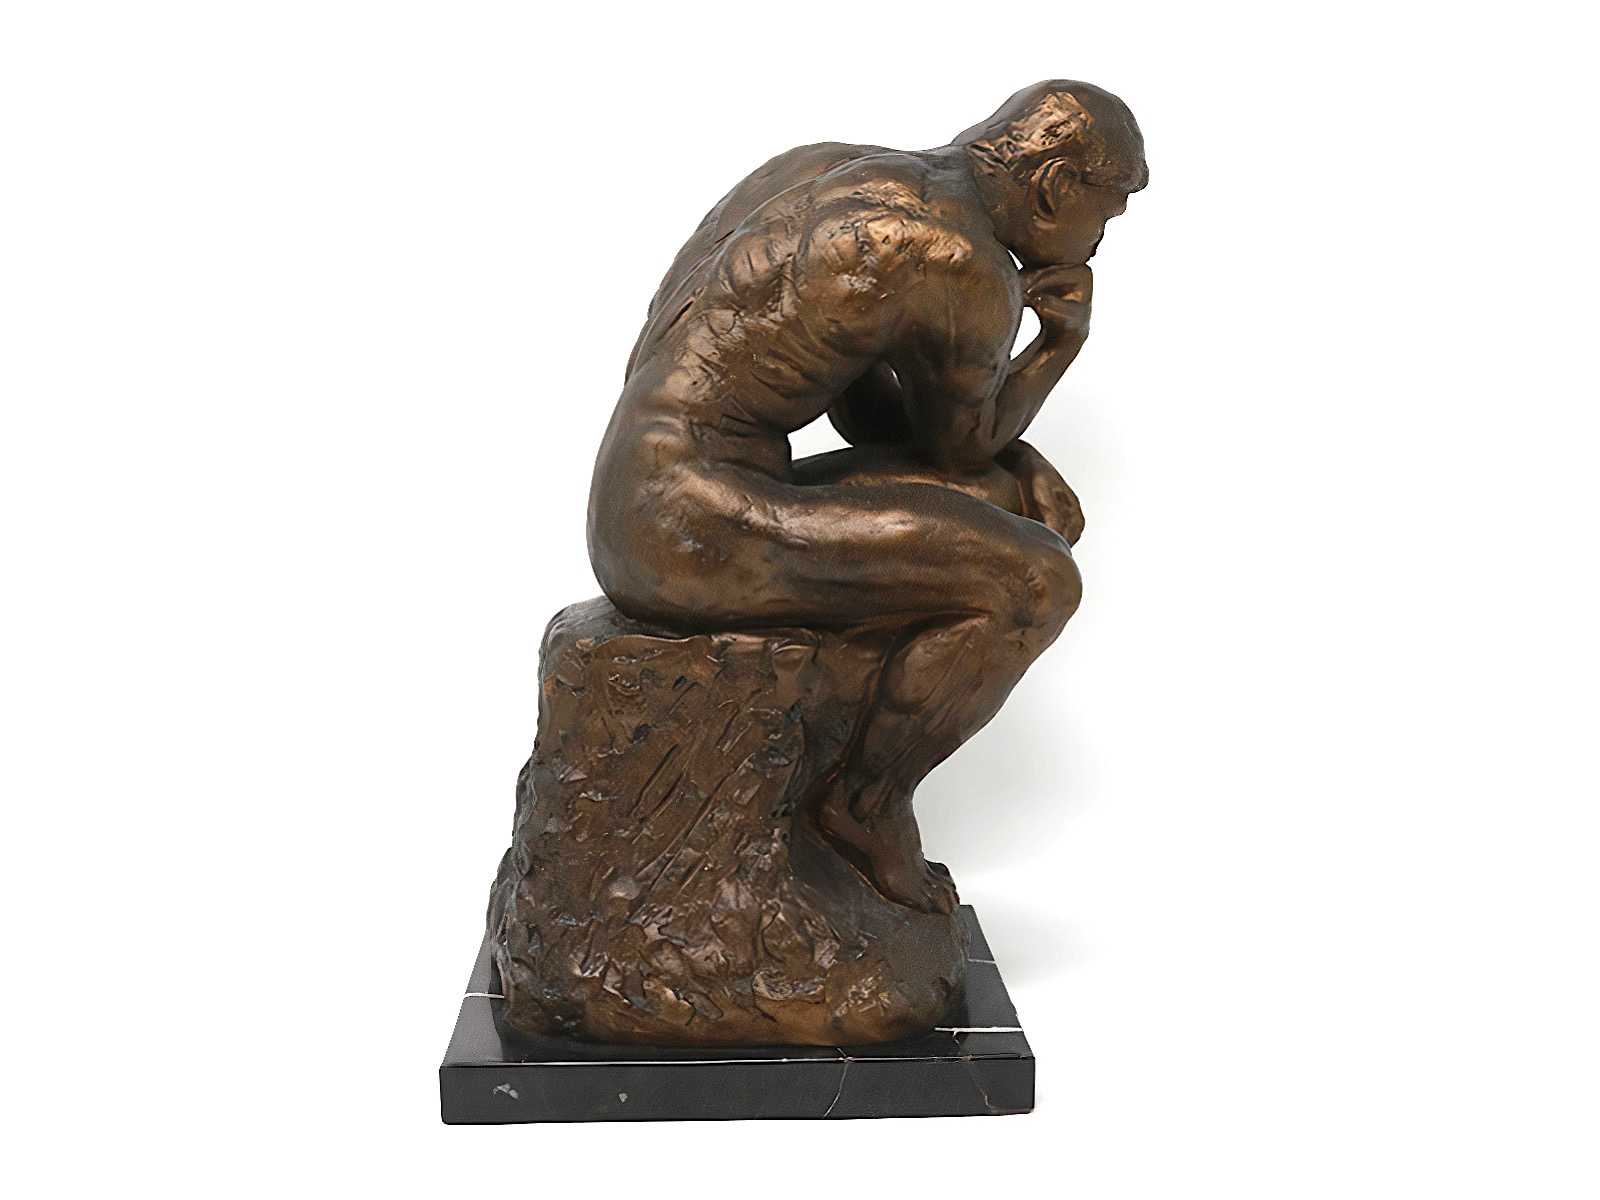 what is the name of the thinker in auguste rodins famous statue and where was he from